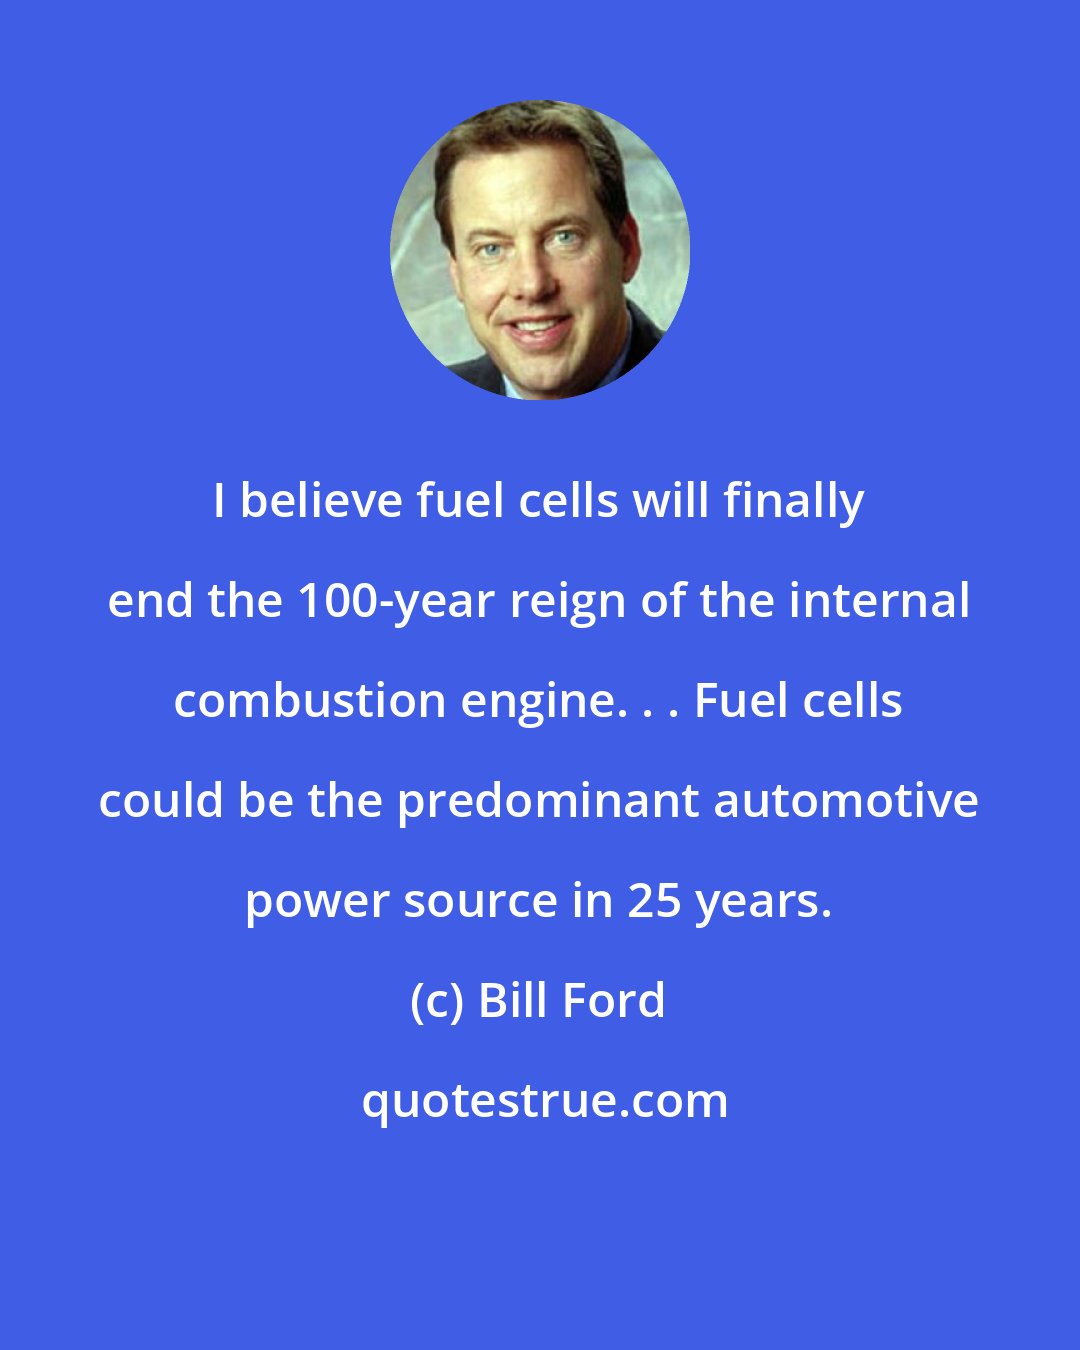 Bill Ford: I believe fuel cells will finally end the 100-year reign of the internal combustion engine. . . Fuel cells could be the predominant automotive power source in 25 years.